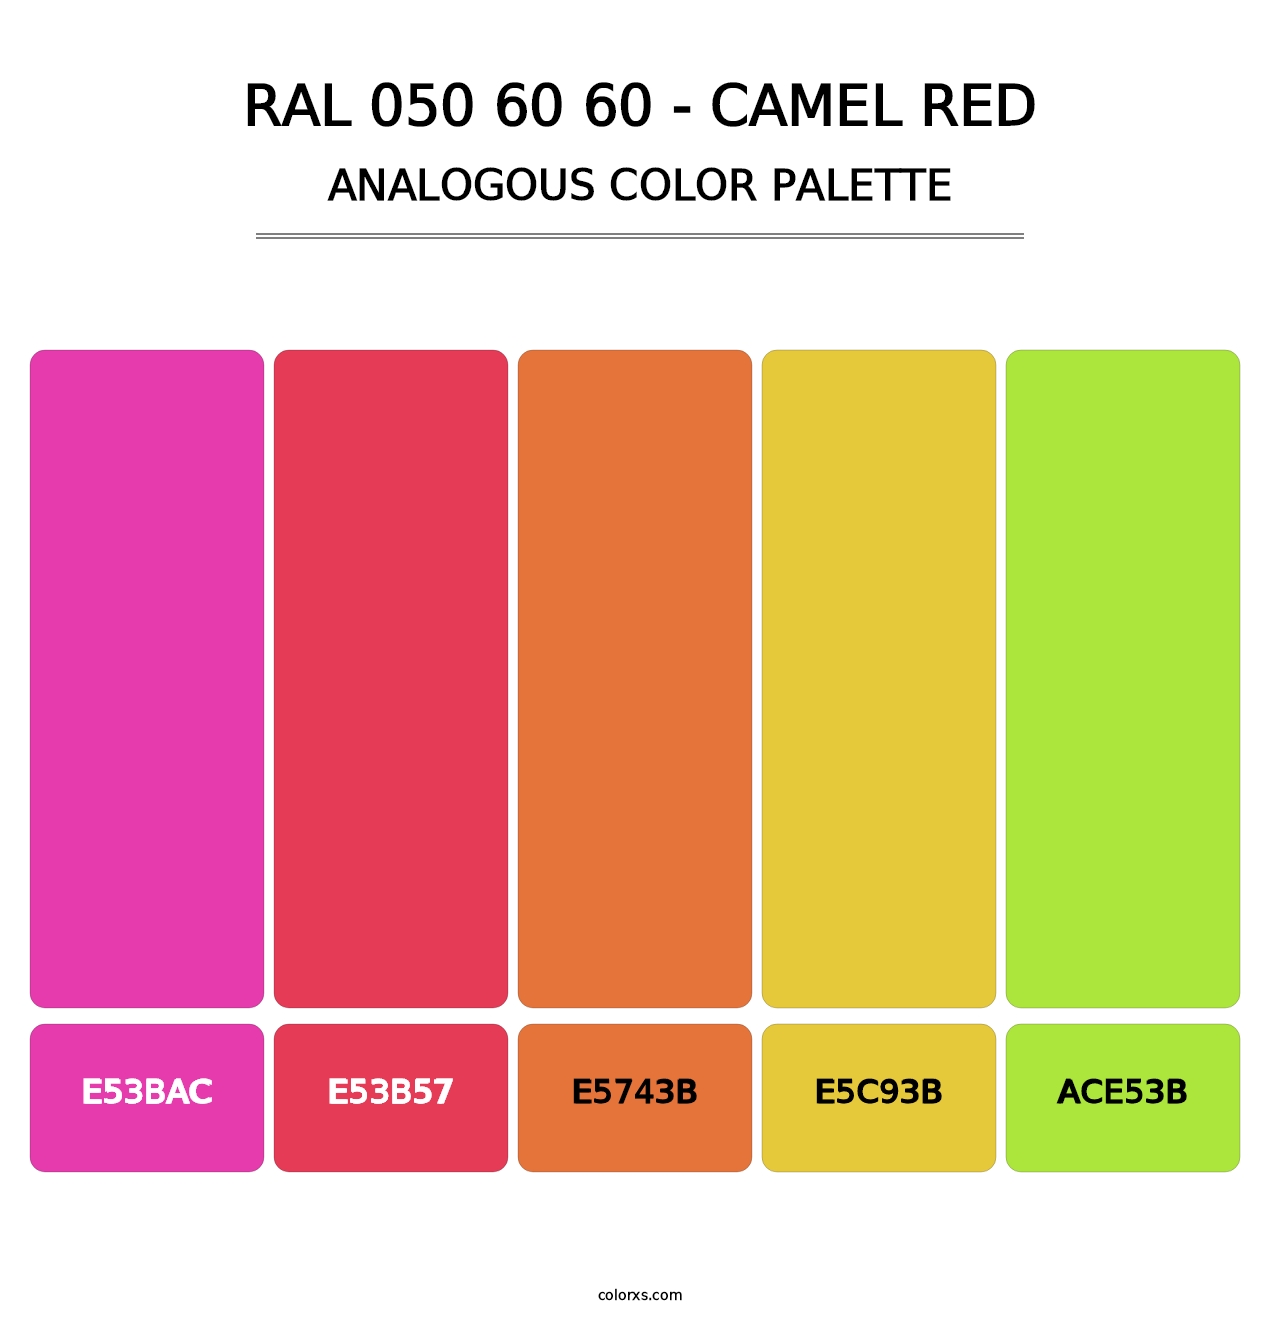 RAL 050 60 60 - Camel Red - Analogous Color Palette